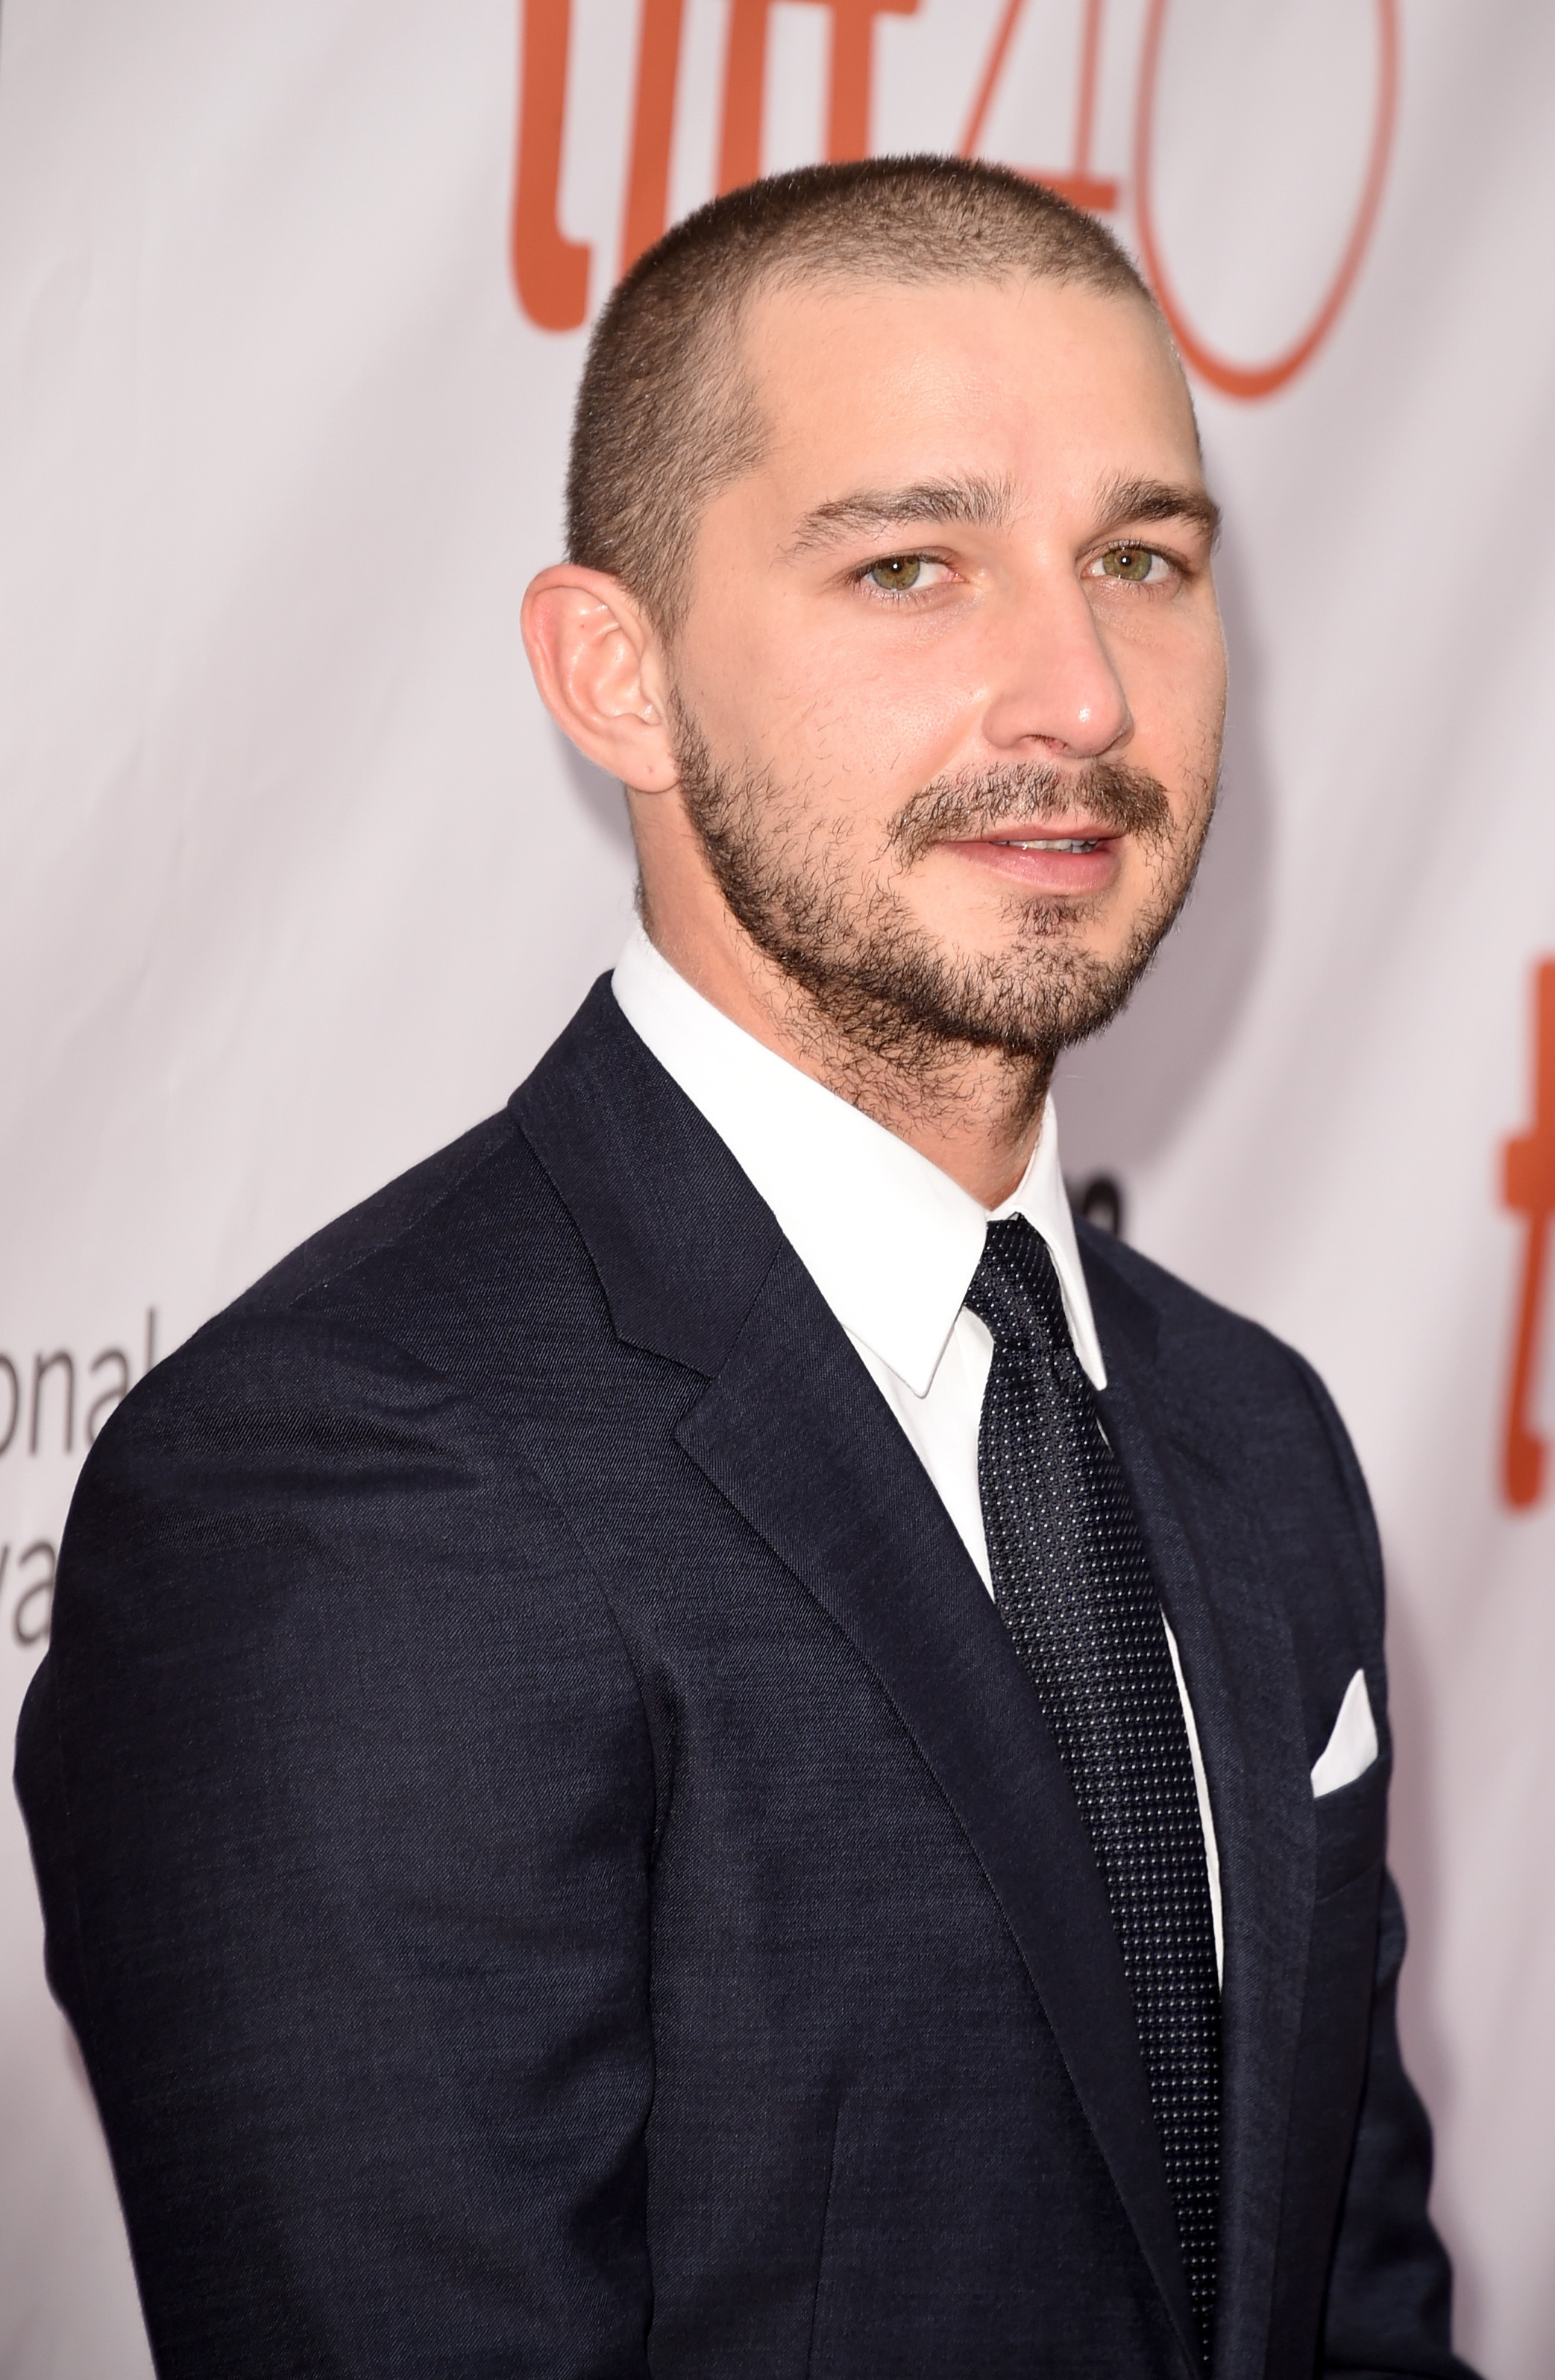 A Shia LaBeouf Look-alike Was Punched In The Face For Resembling The Actor (Yes, This ...